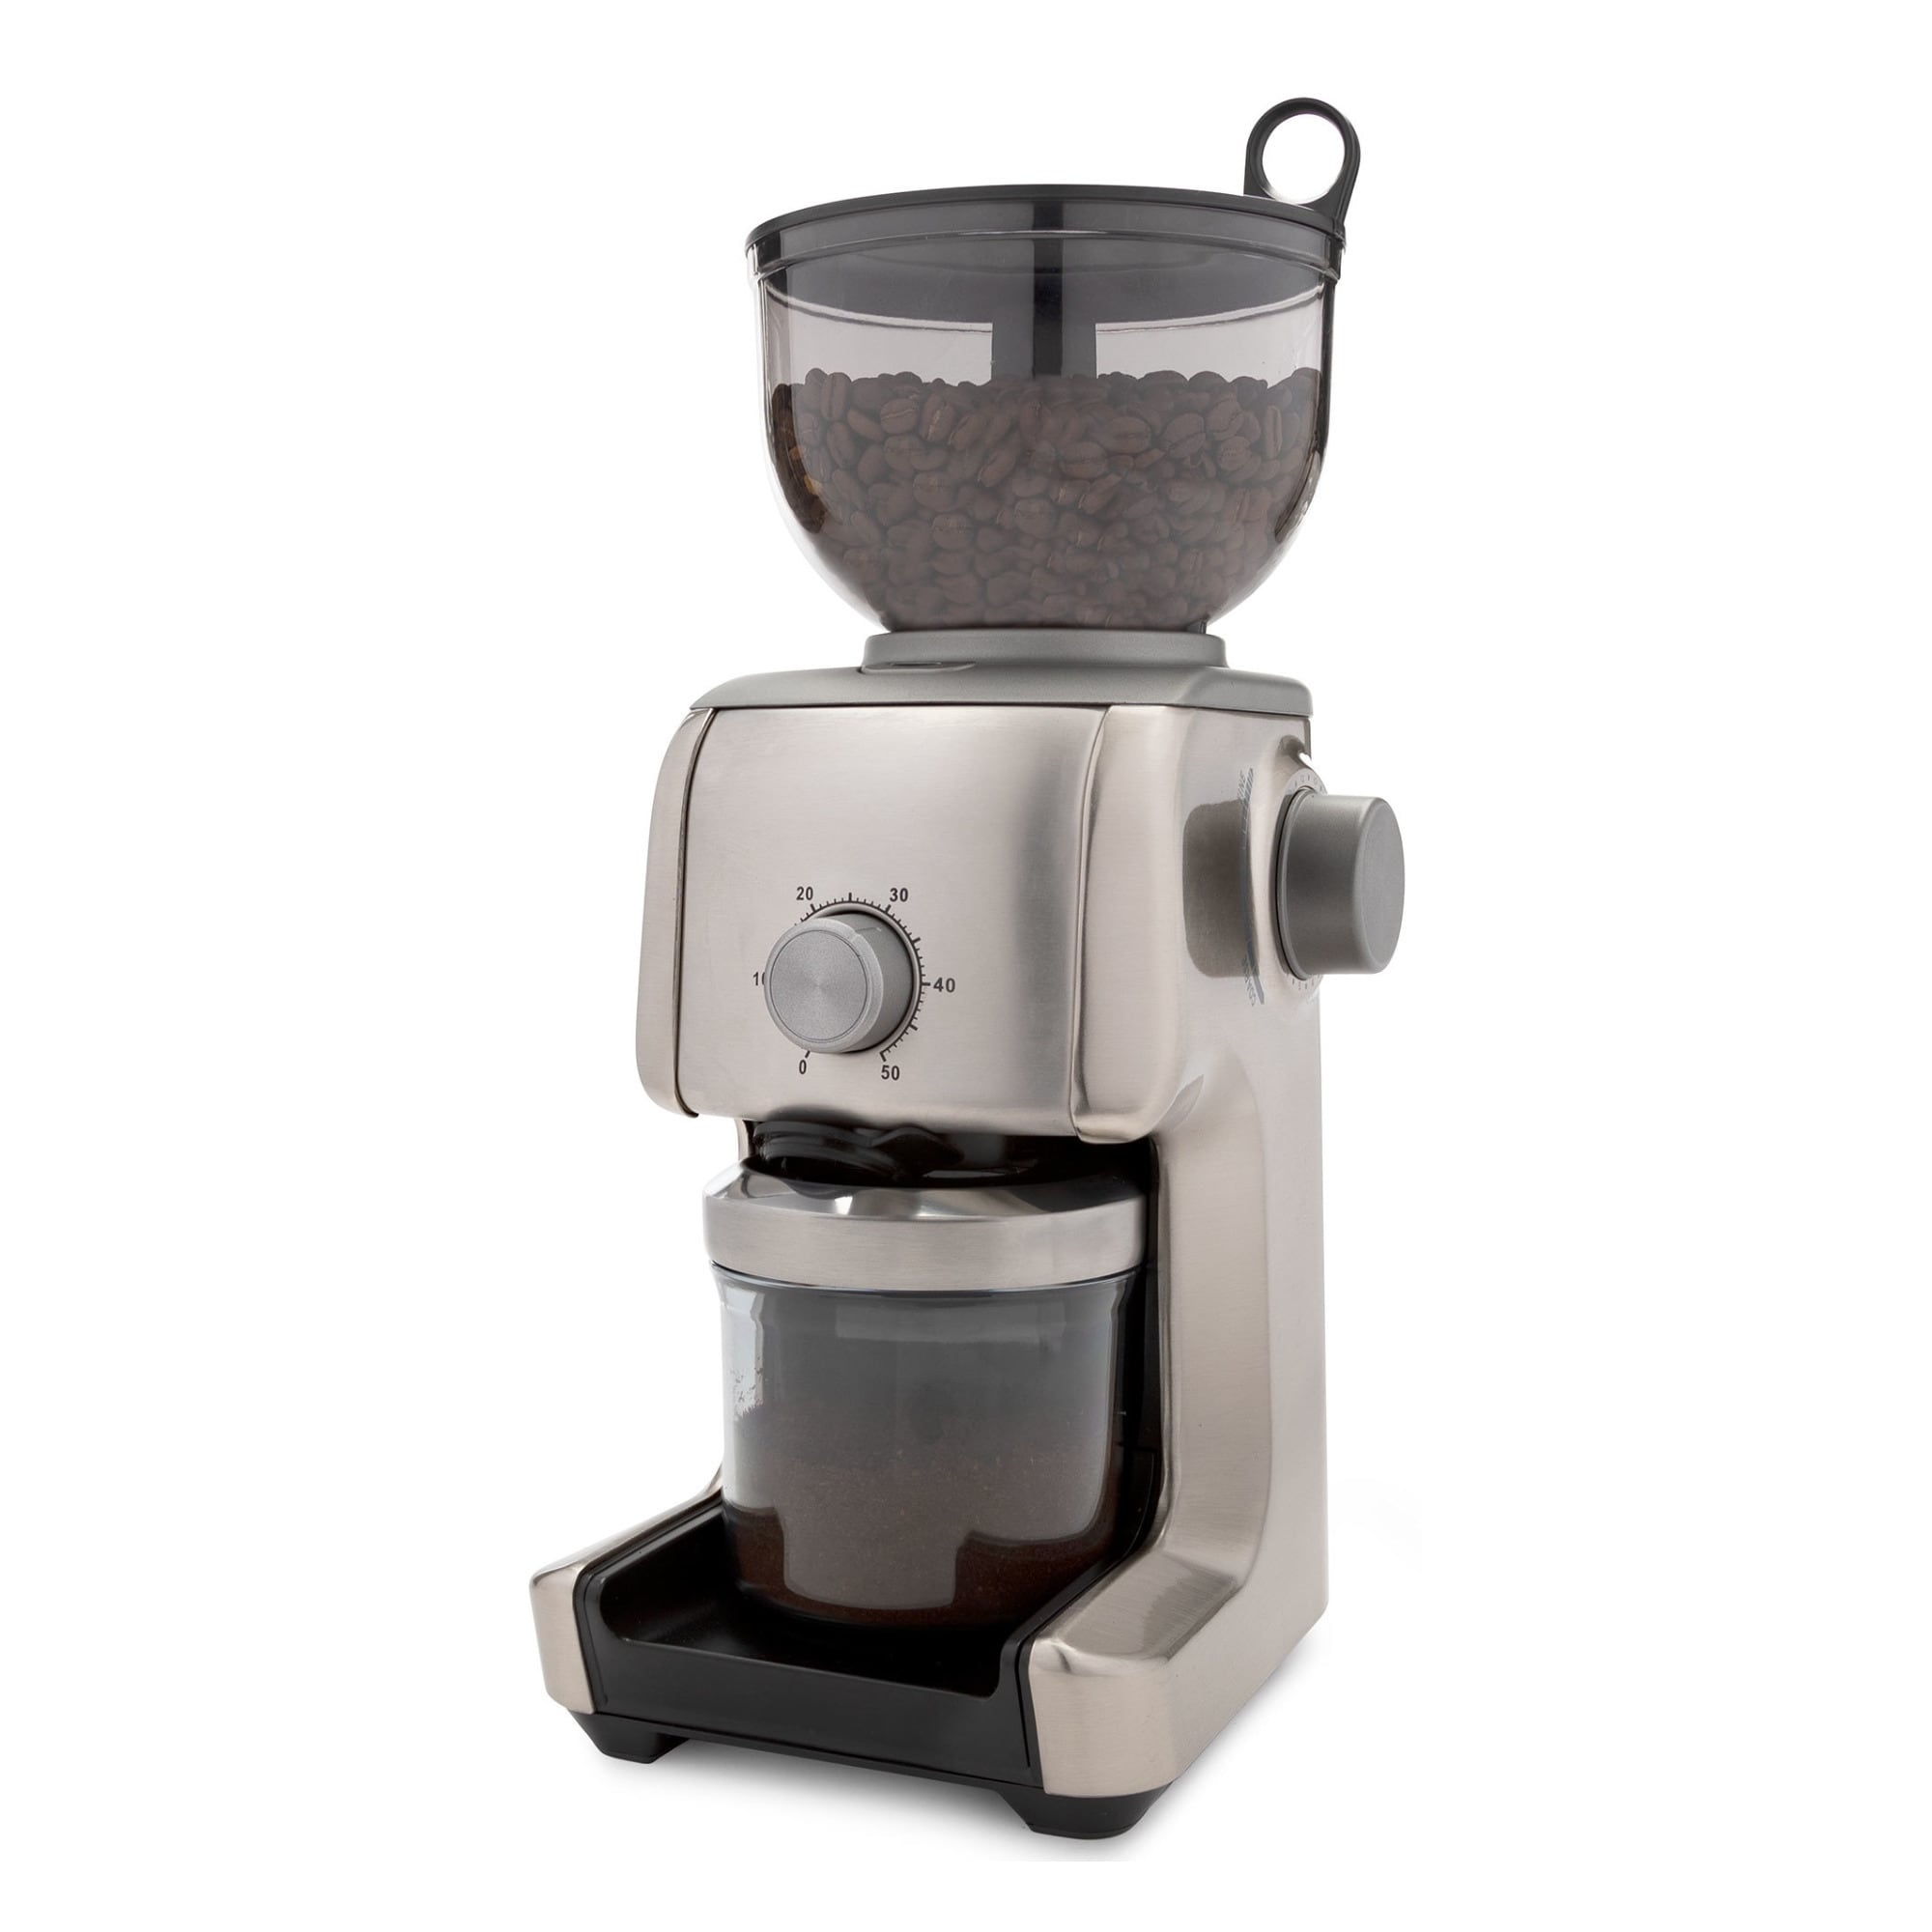 https://ak1.ostkcdn.com/images/products/is/images/direct/f8c2bda8d341d69787700789b78f06d8a33df023/ChefWave-Bonne-Conical-Burr-Coffee-Grinder-%28Stainless-Steel%29.jpg